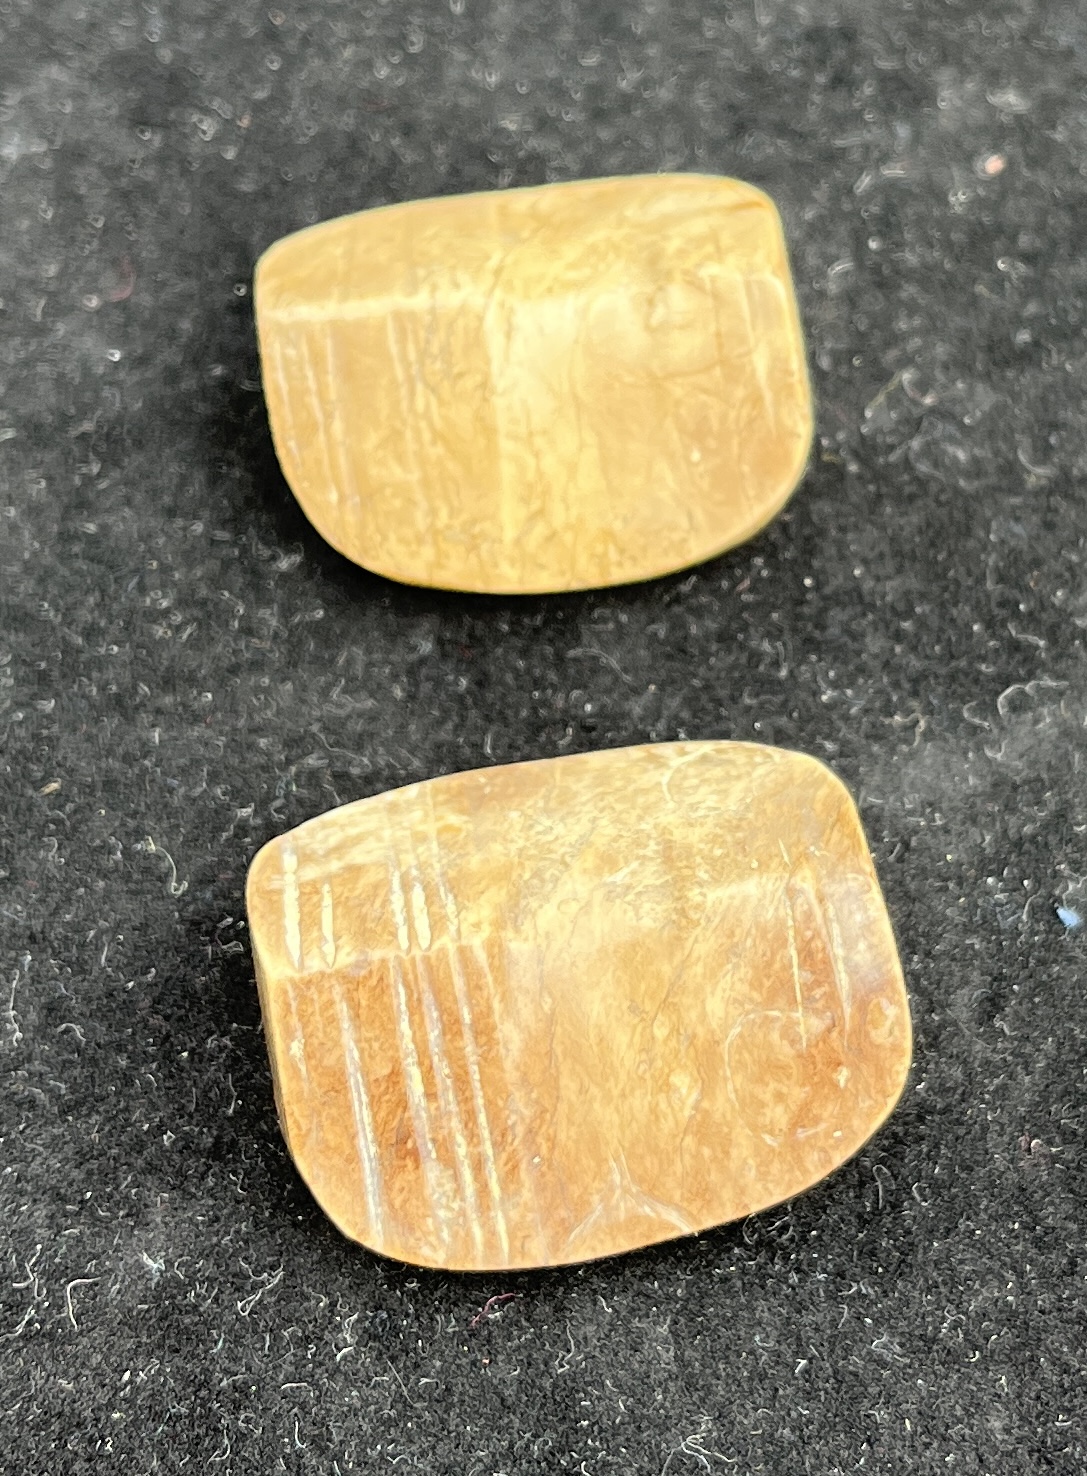 TWO CHINESE JADE CONG PENDANT FRAGMENTS, LIANGZHU CULTURE, 3300 – 2300 BC - Image 3 of 7